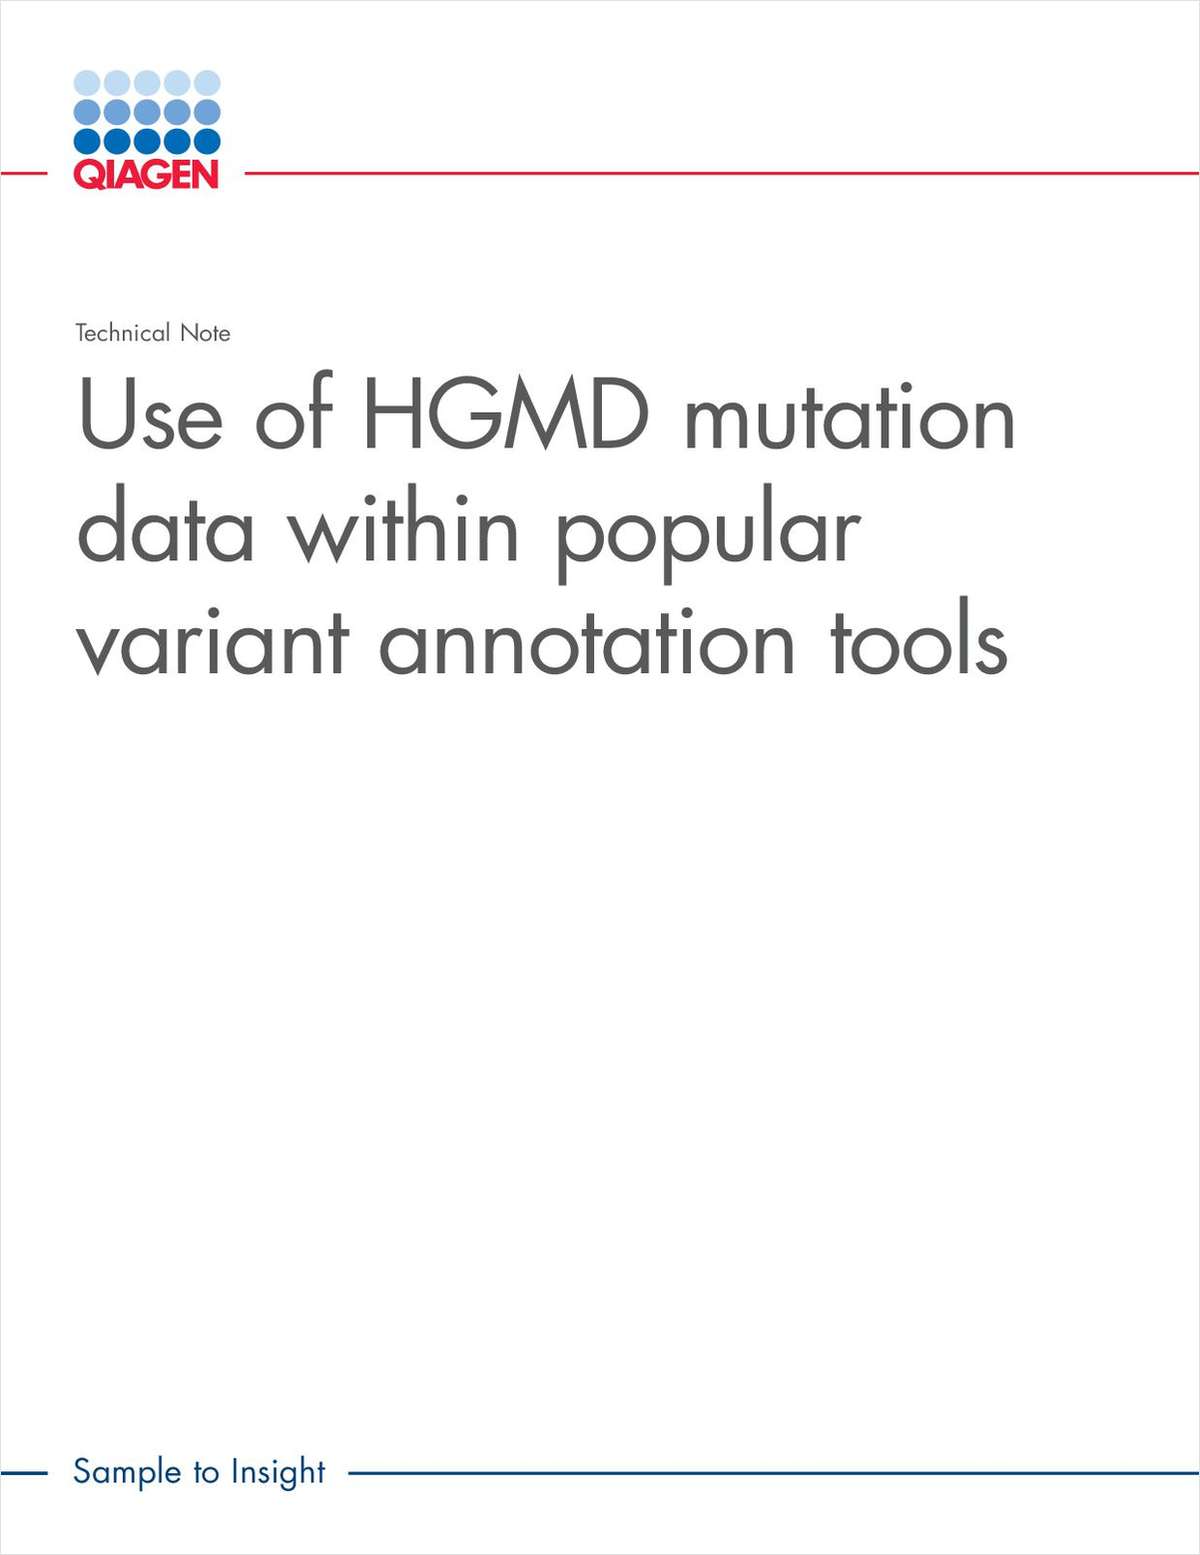 Use of HGMD Mutation Data Within Popular Variant Annotation Tools